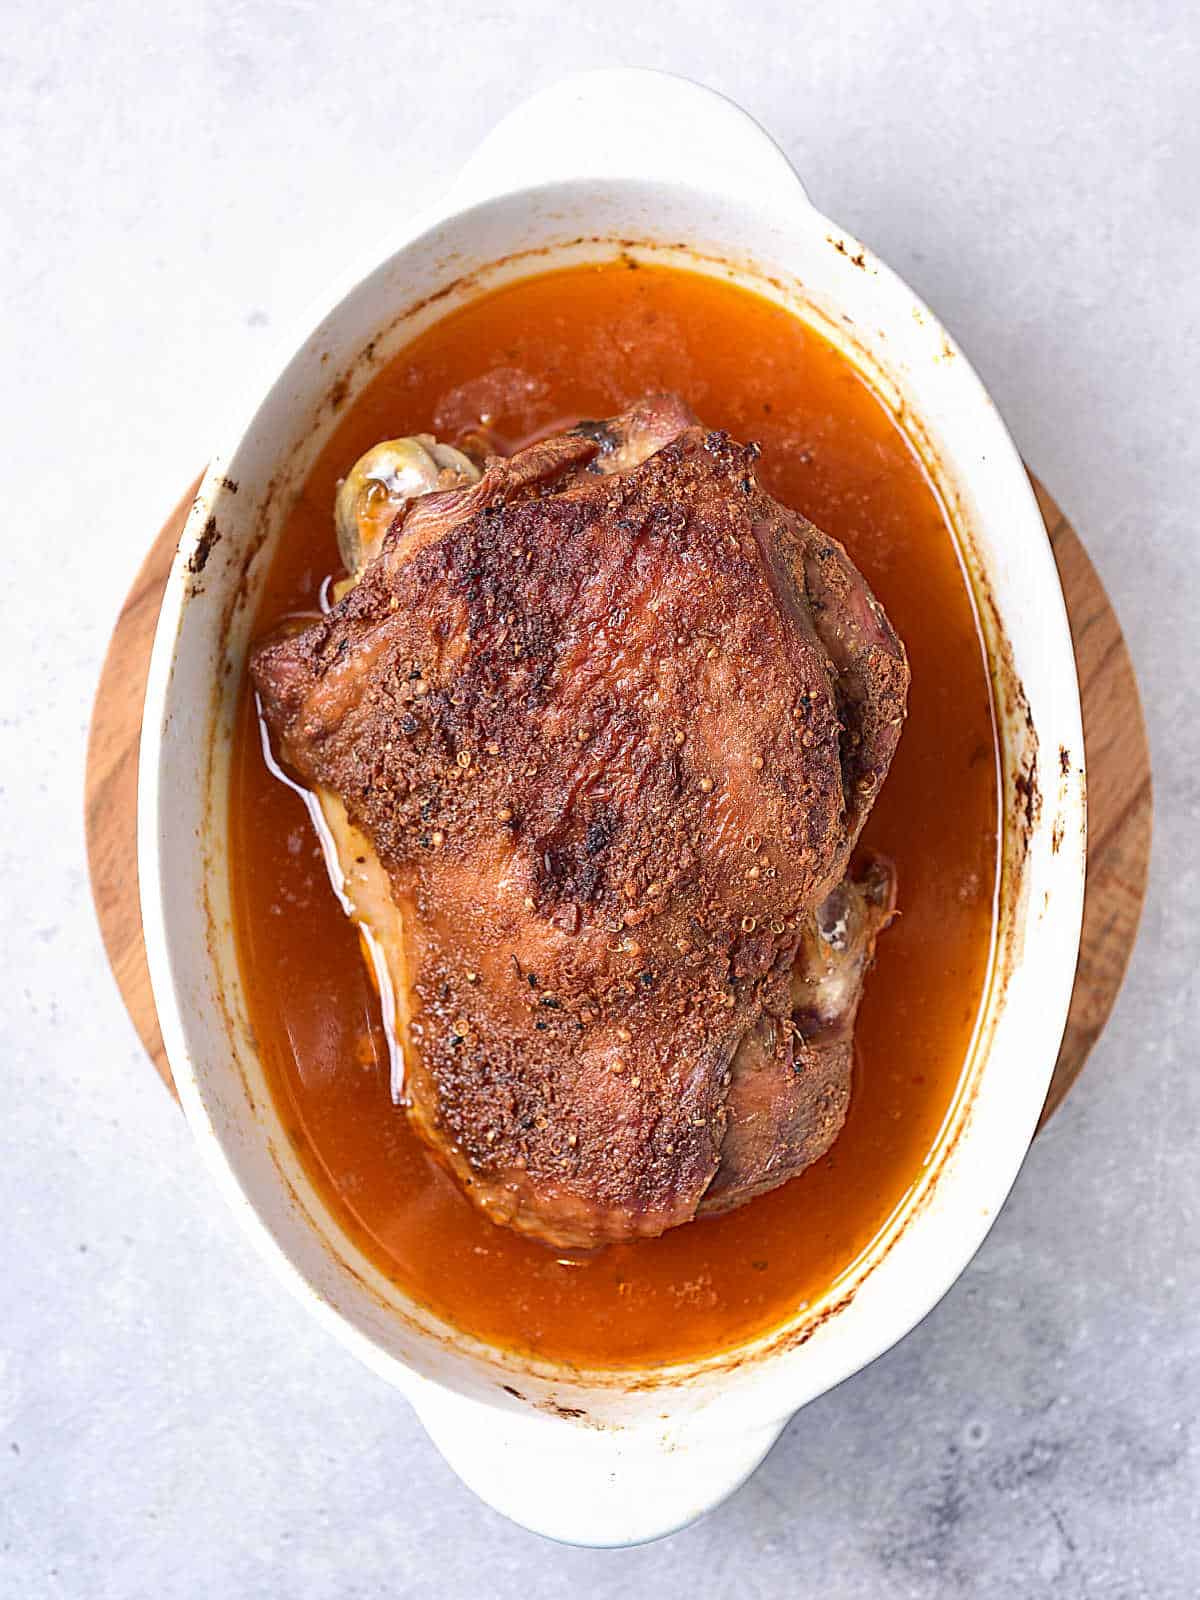 Baked seasoned turkey thigh in an oval white dish on a light grey surface.